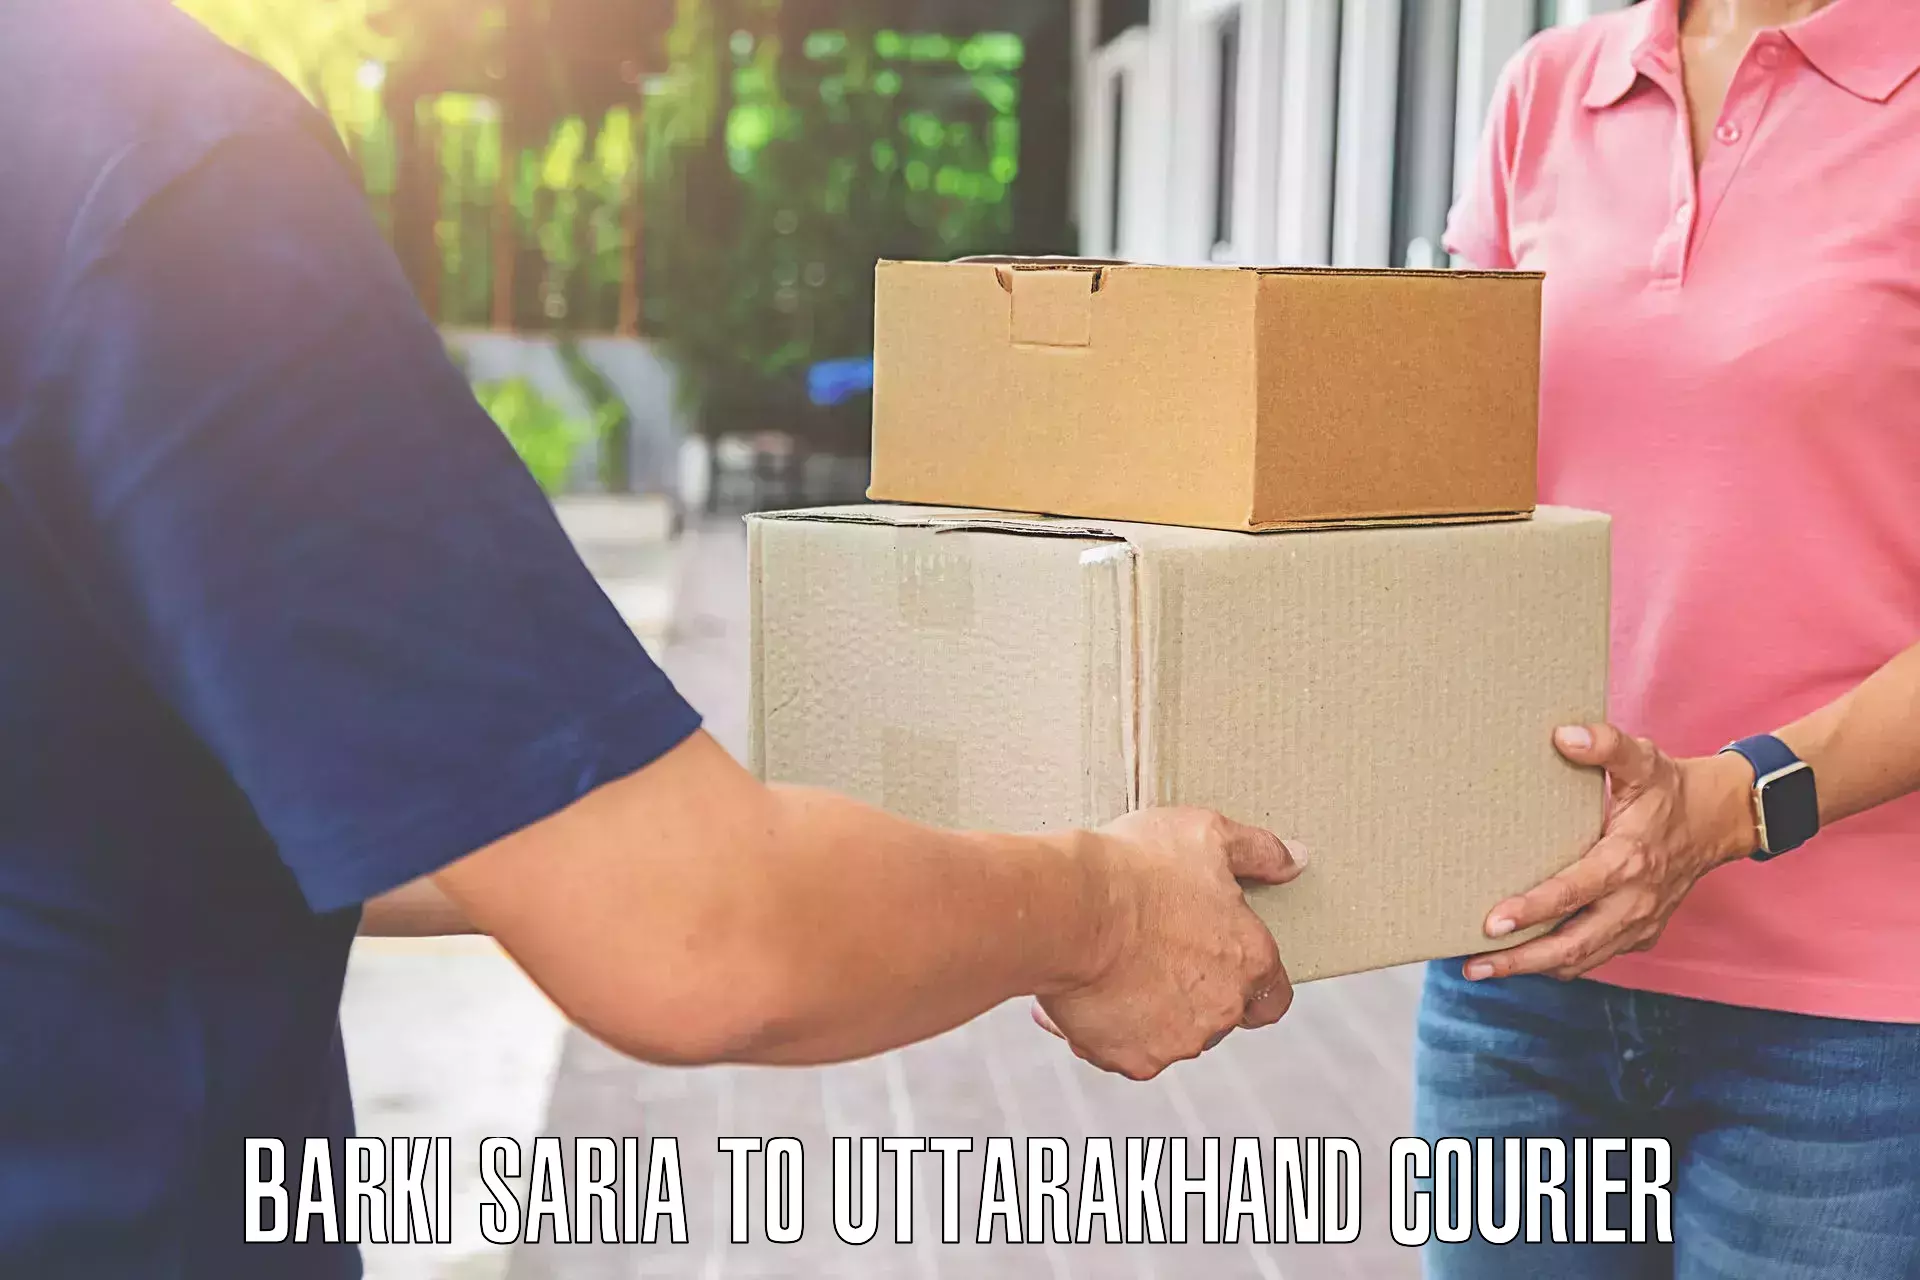 Reliable baggage delivery in Barki Saria to Uttarakhand